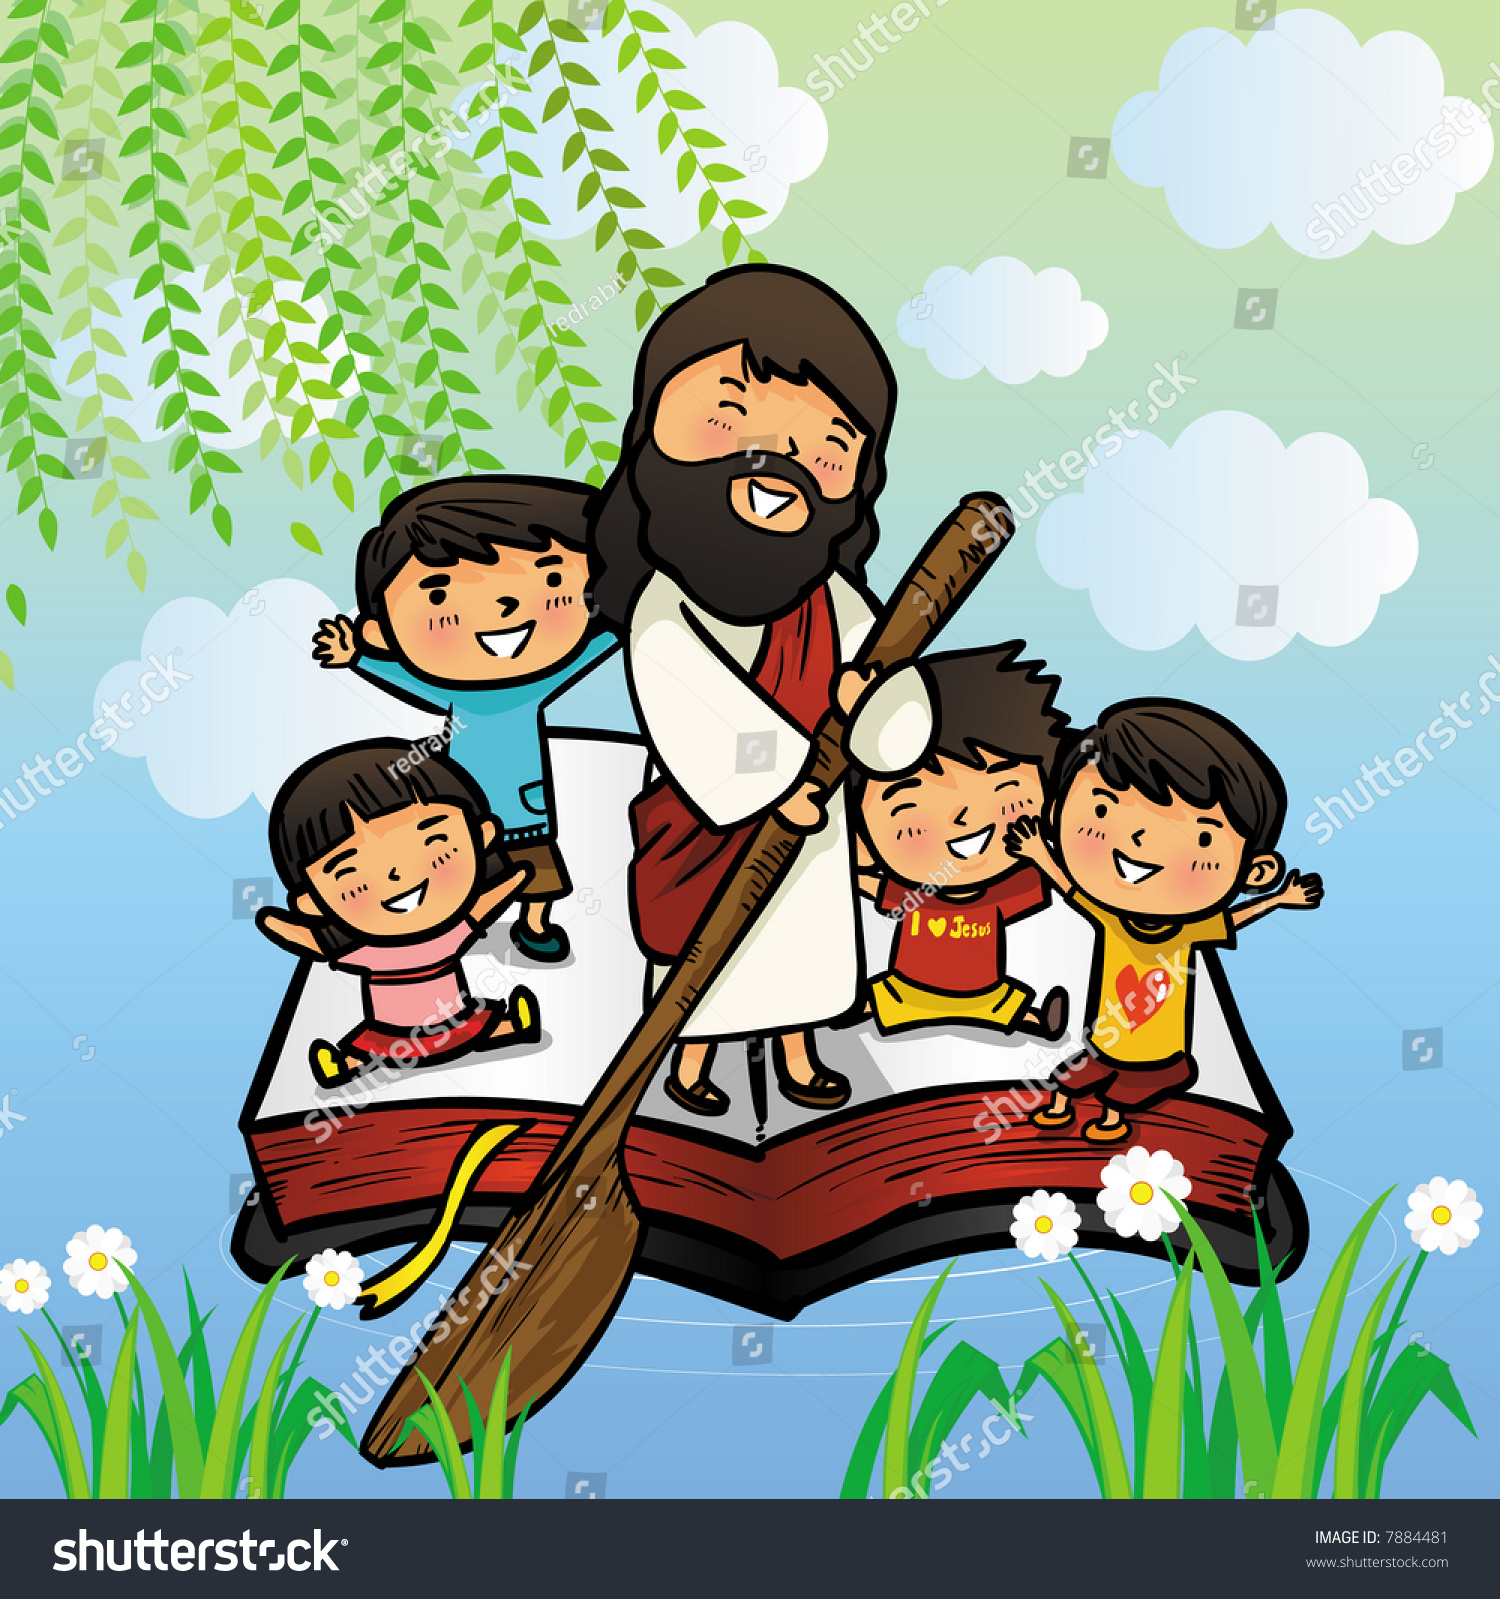 jesus in a boat clipart - photo #12